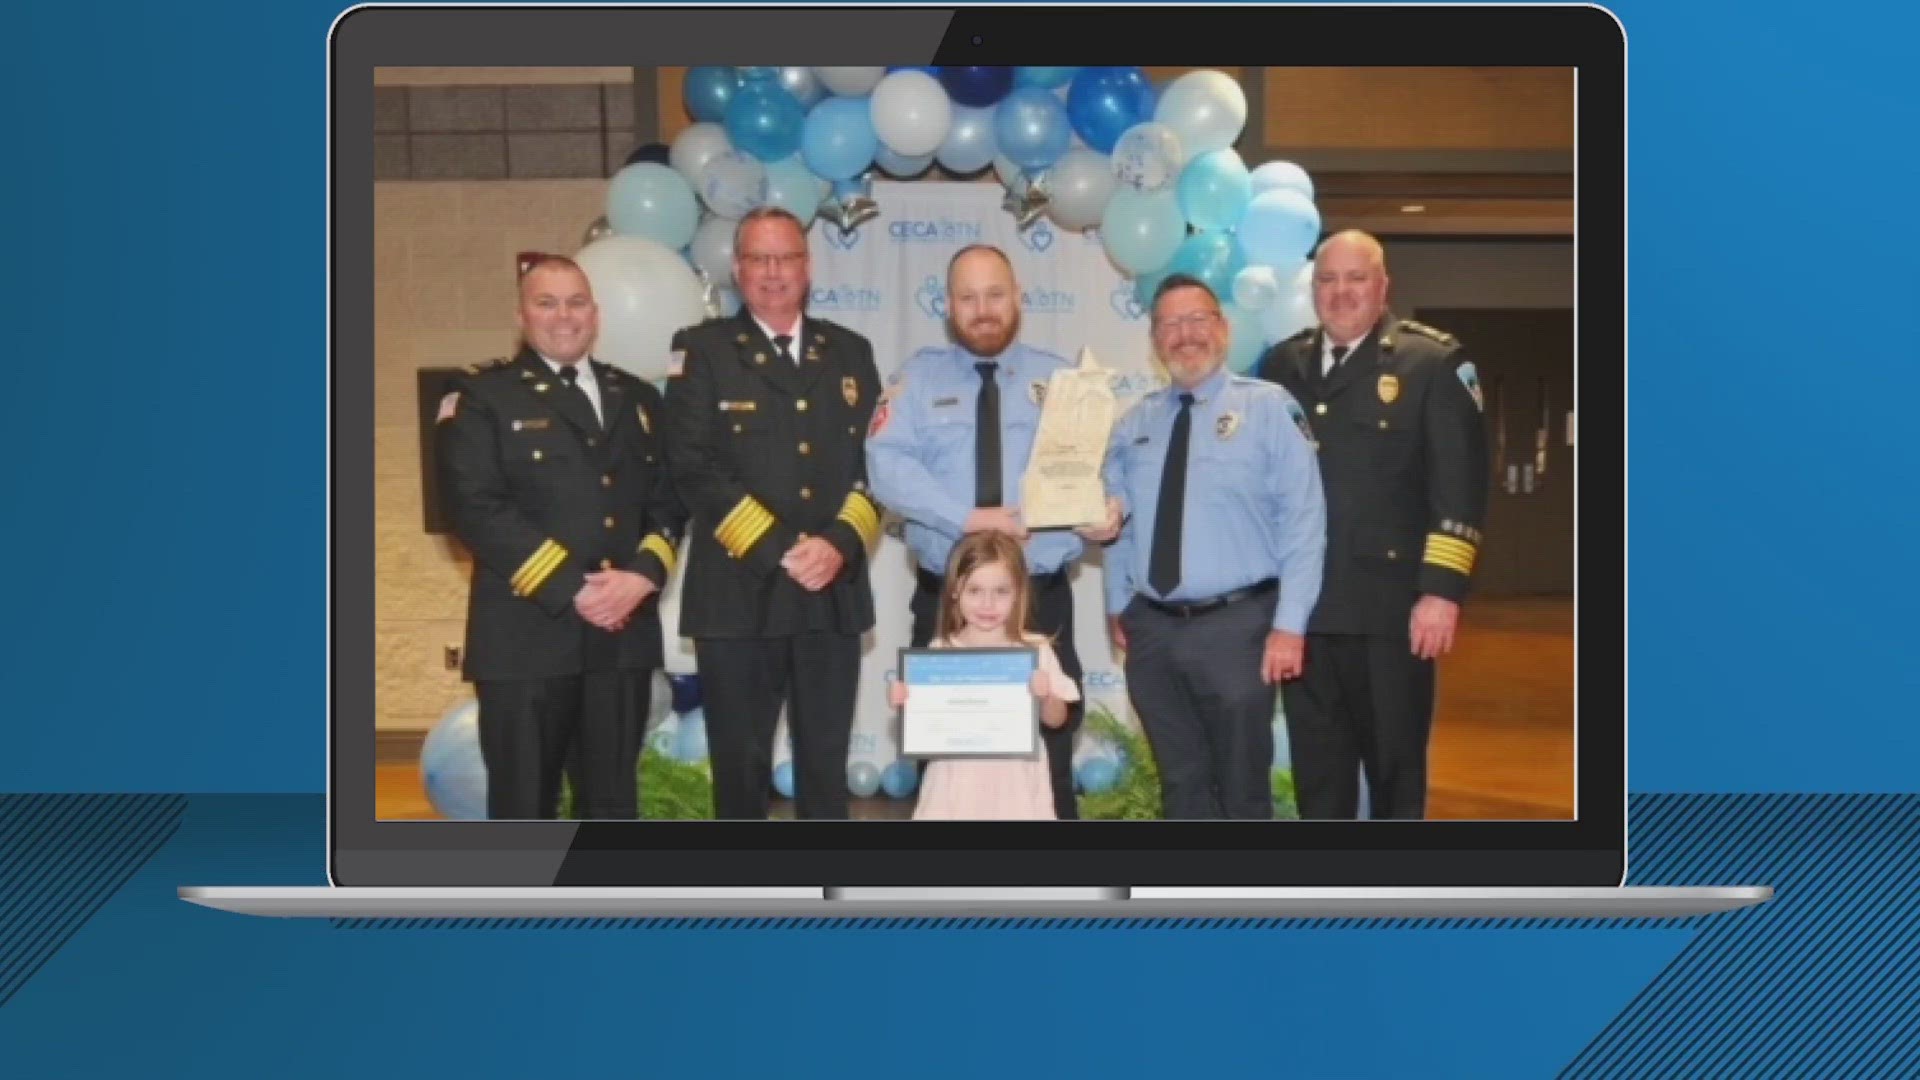 Local EMS workers are being honored for saving a little girl.
	They were recognized during the Emergency Care Alliance of Tennessee's annual star of life awards.